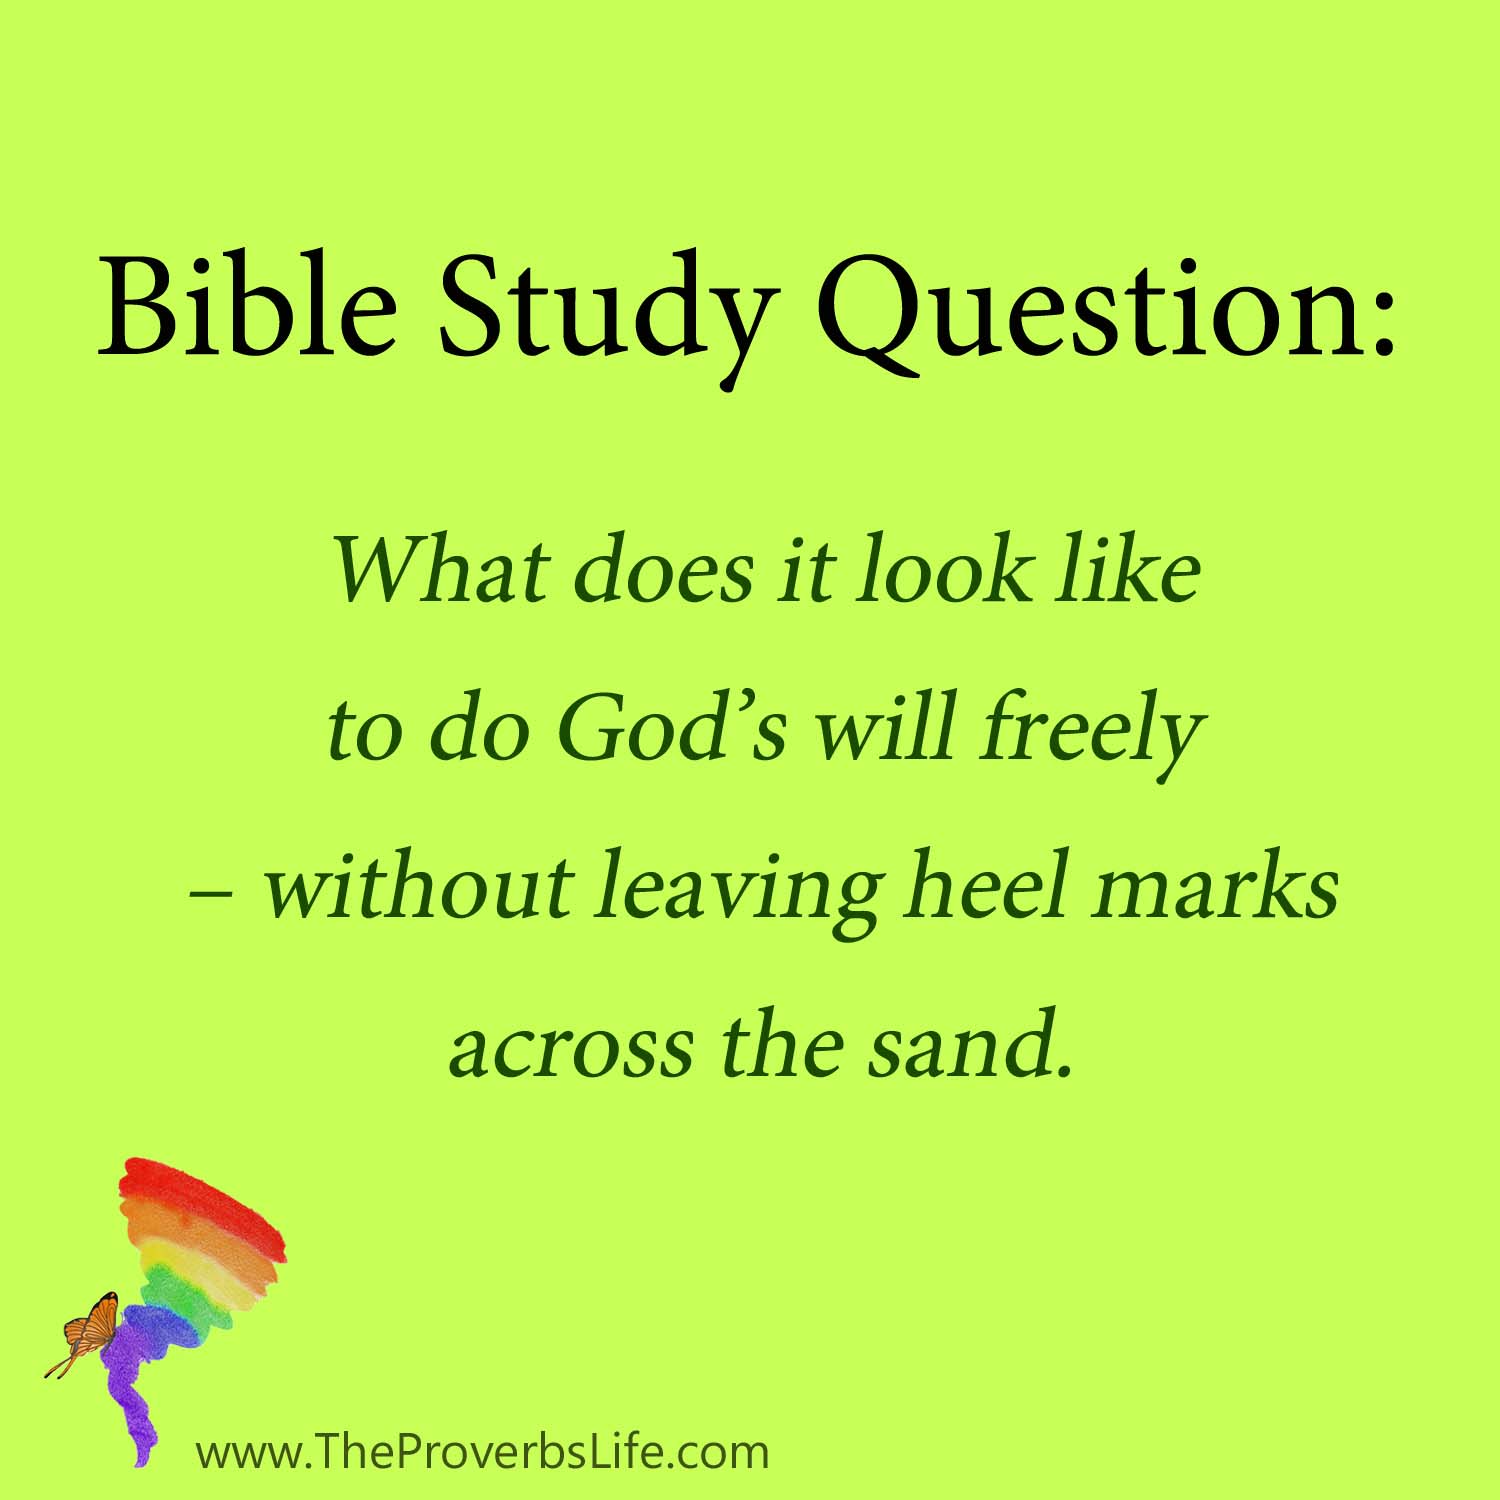 Bible Study Question - in Gods will